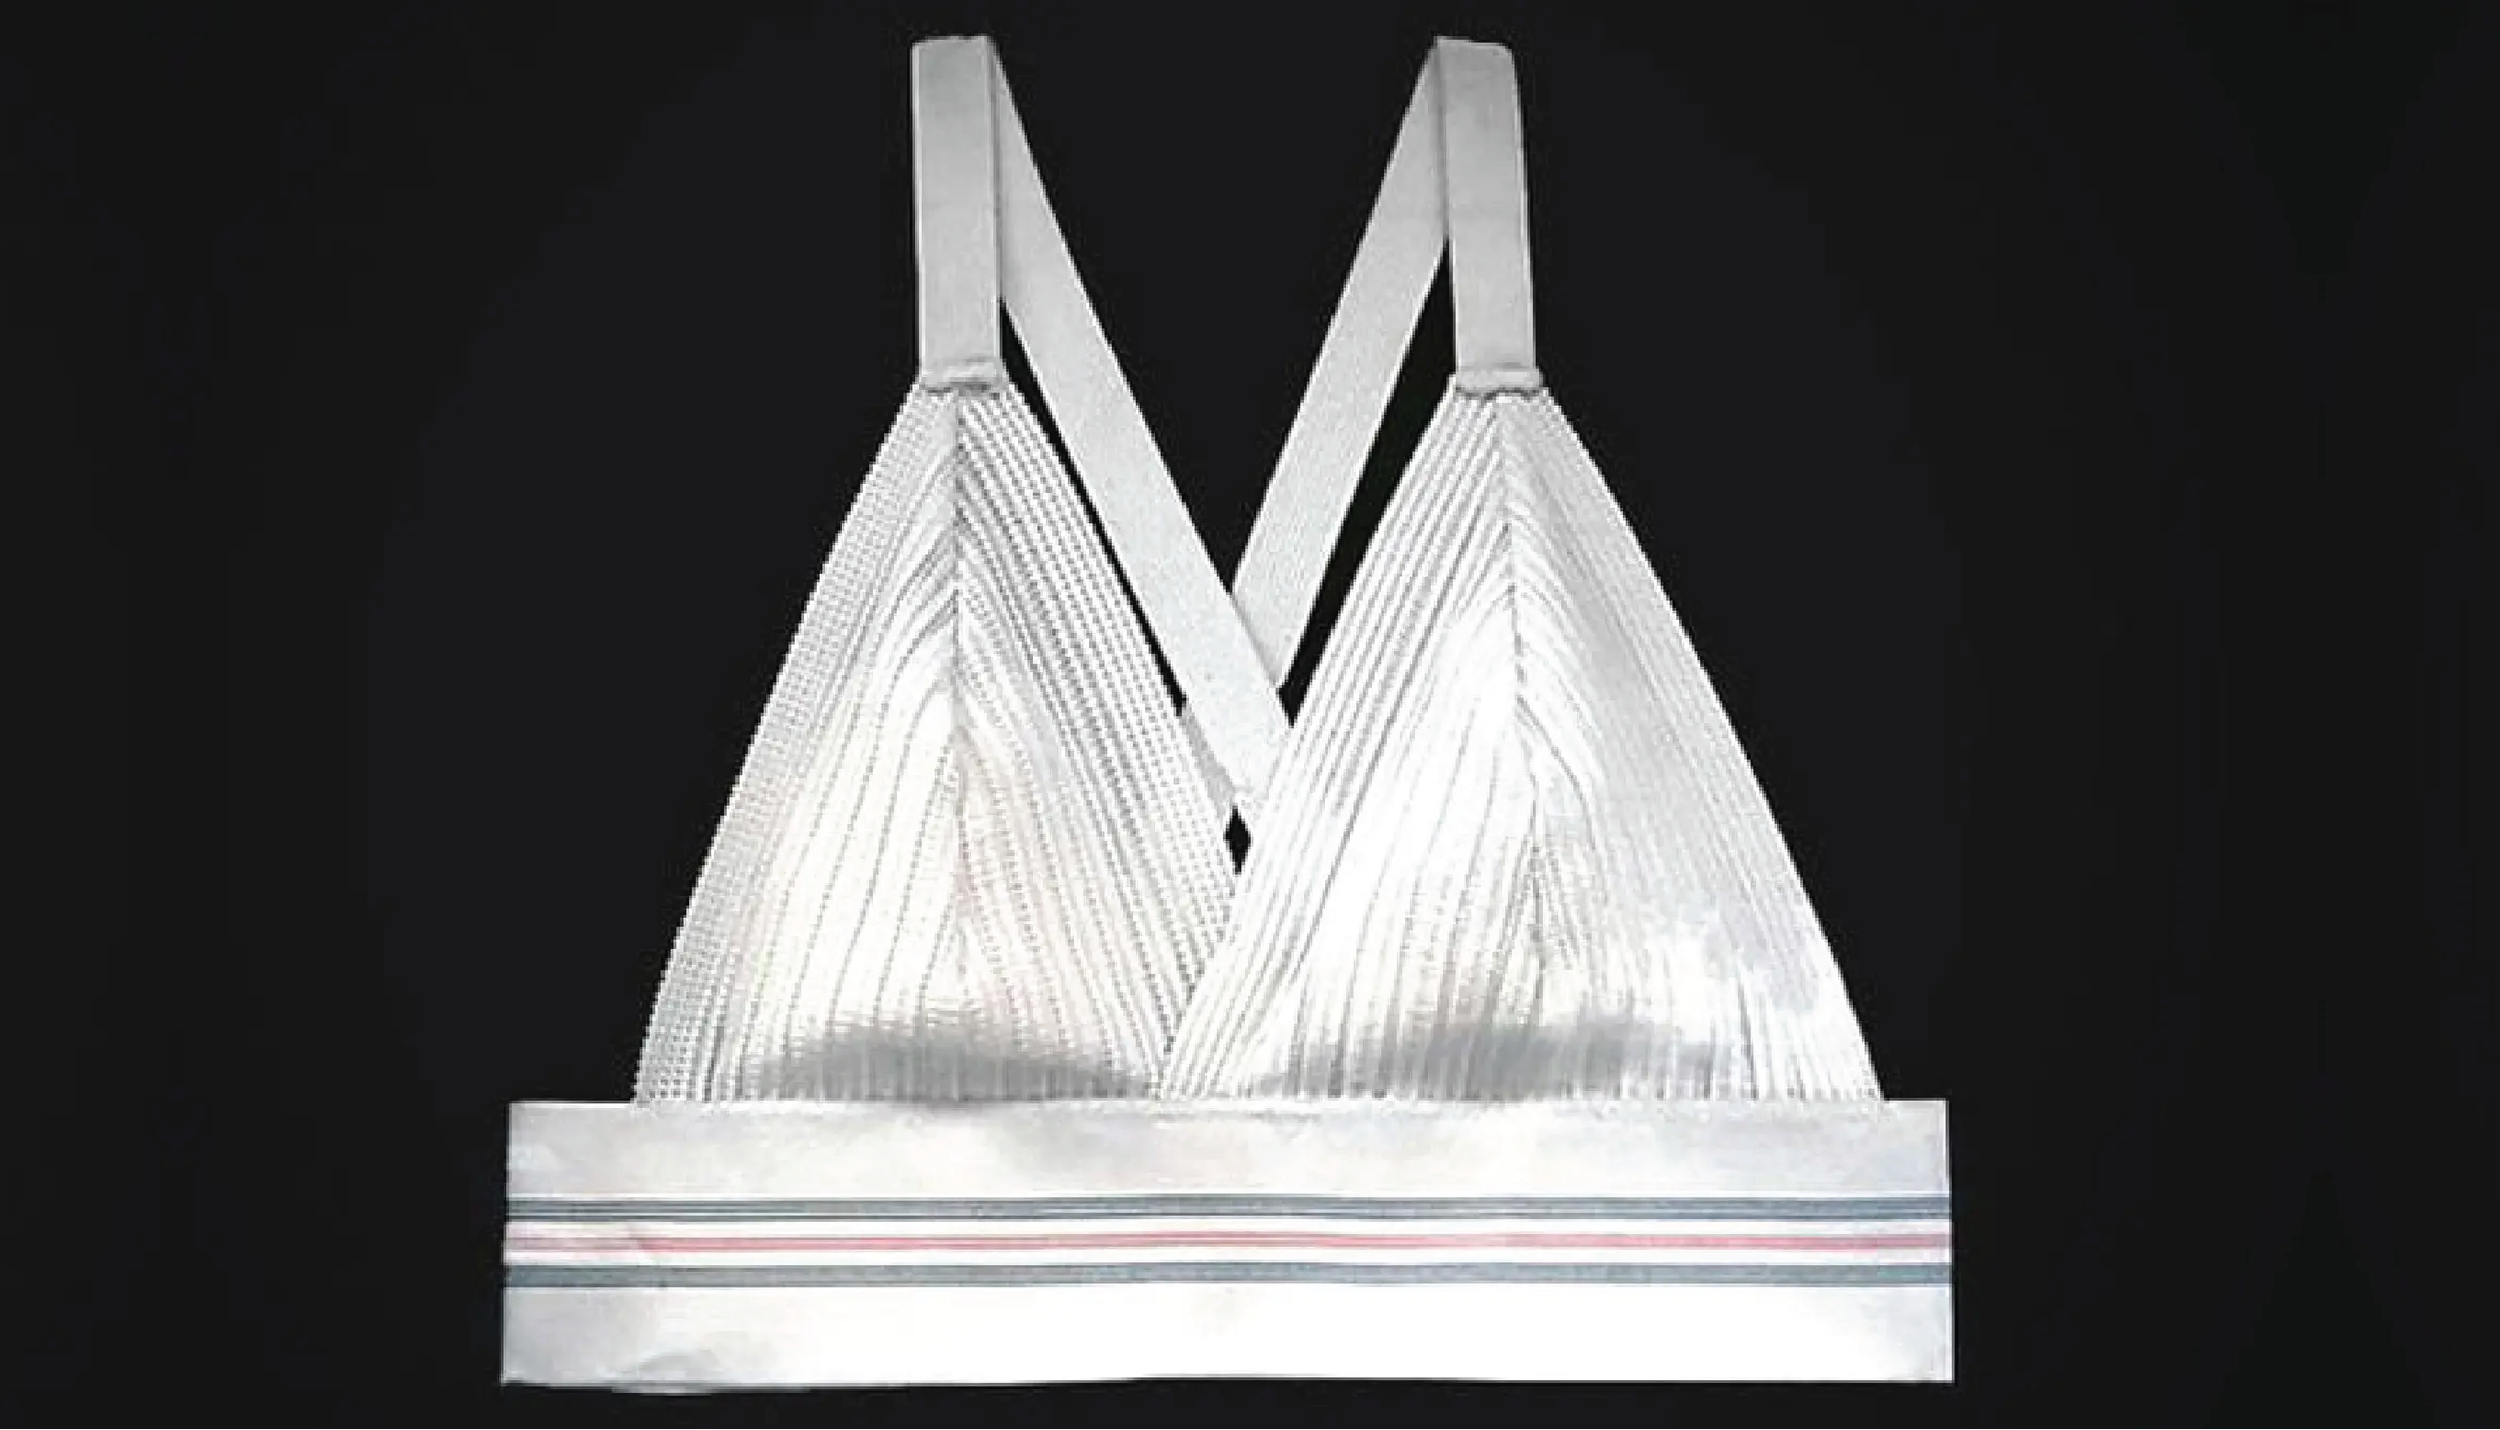 Link #105: The Sports Bra Was First Invented by the Greek